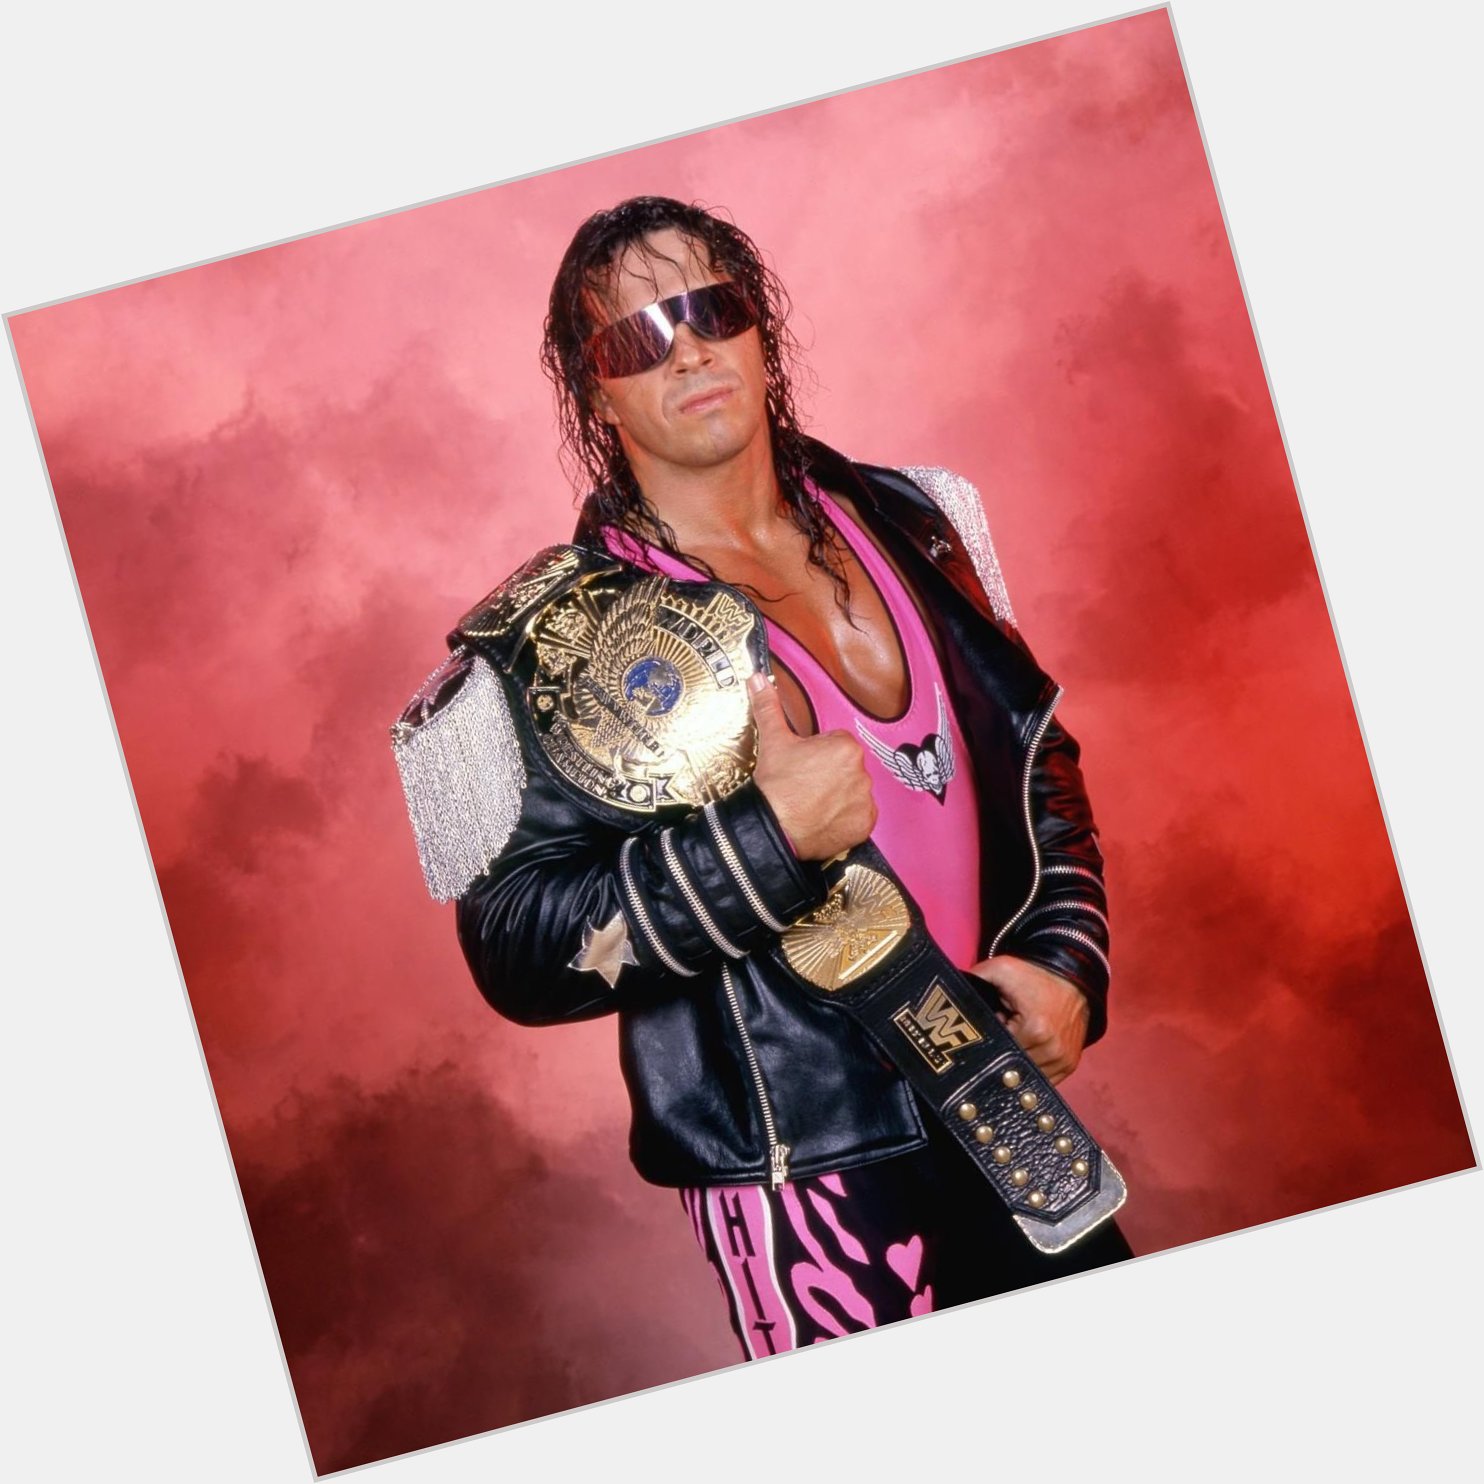 Happy Birthday to my all time favorite wrestler and the GOAT. Bret Hart. 